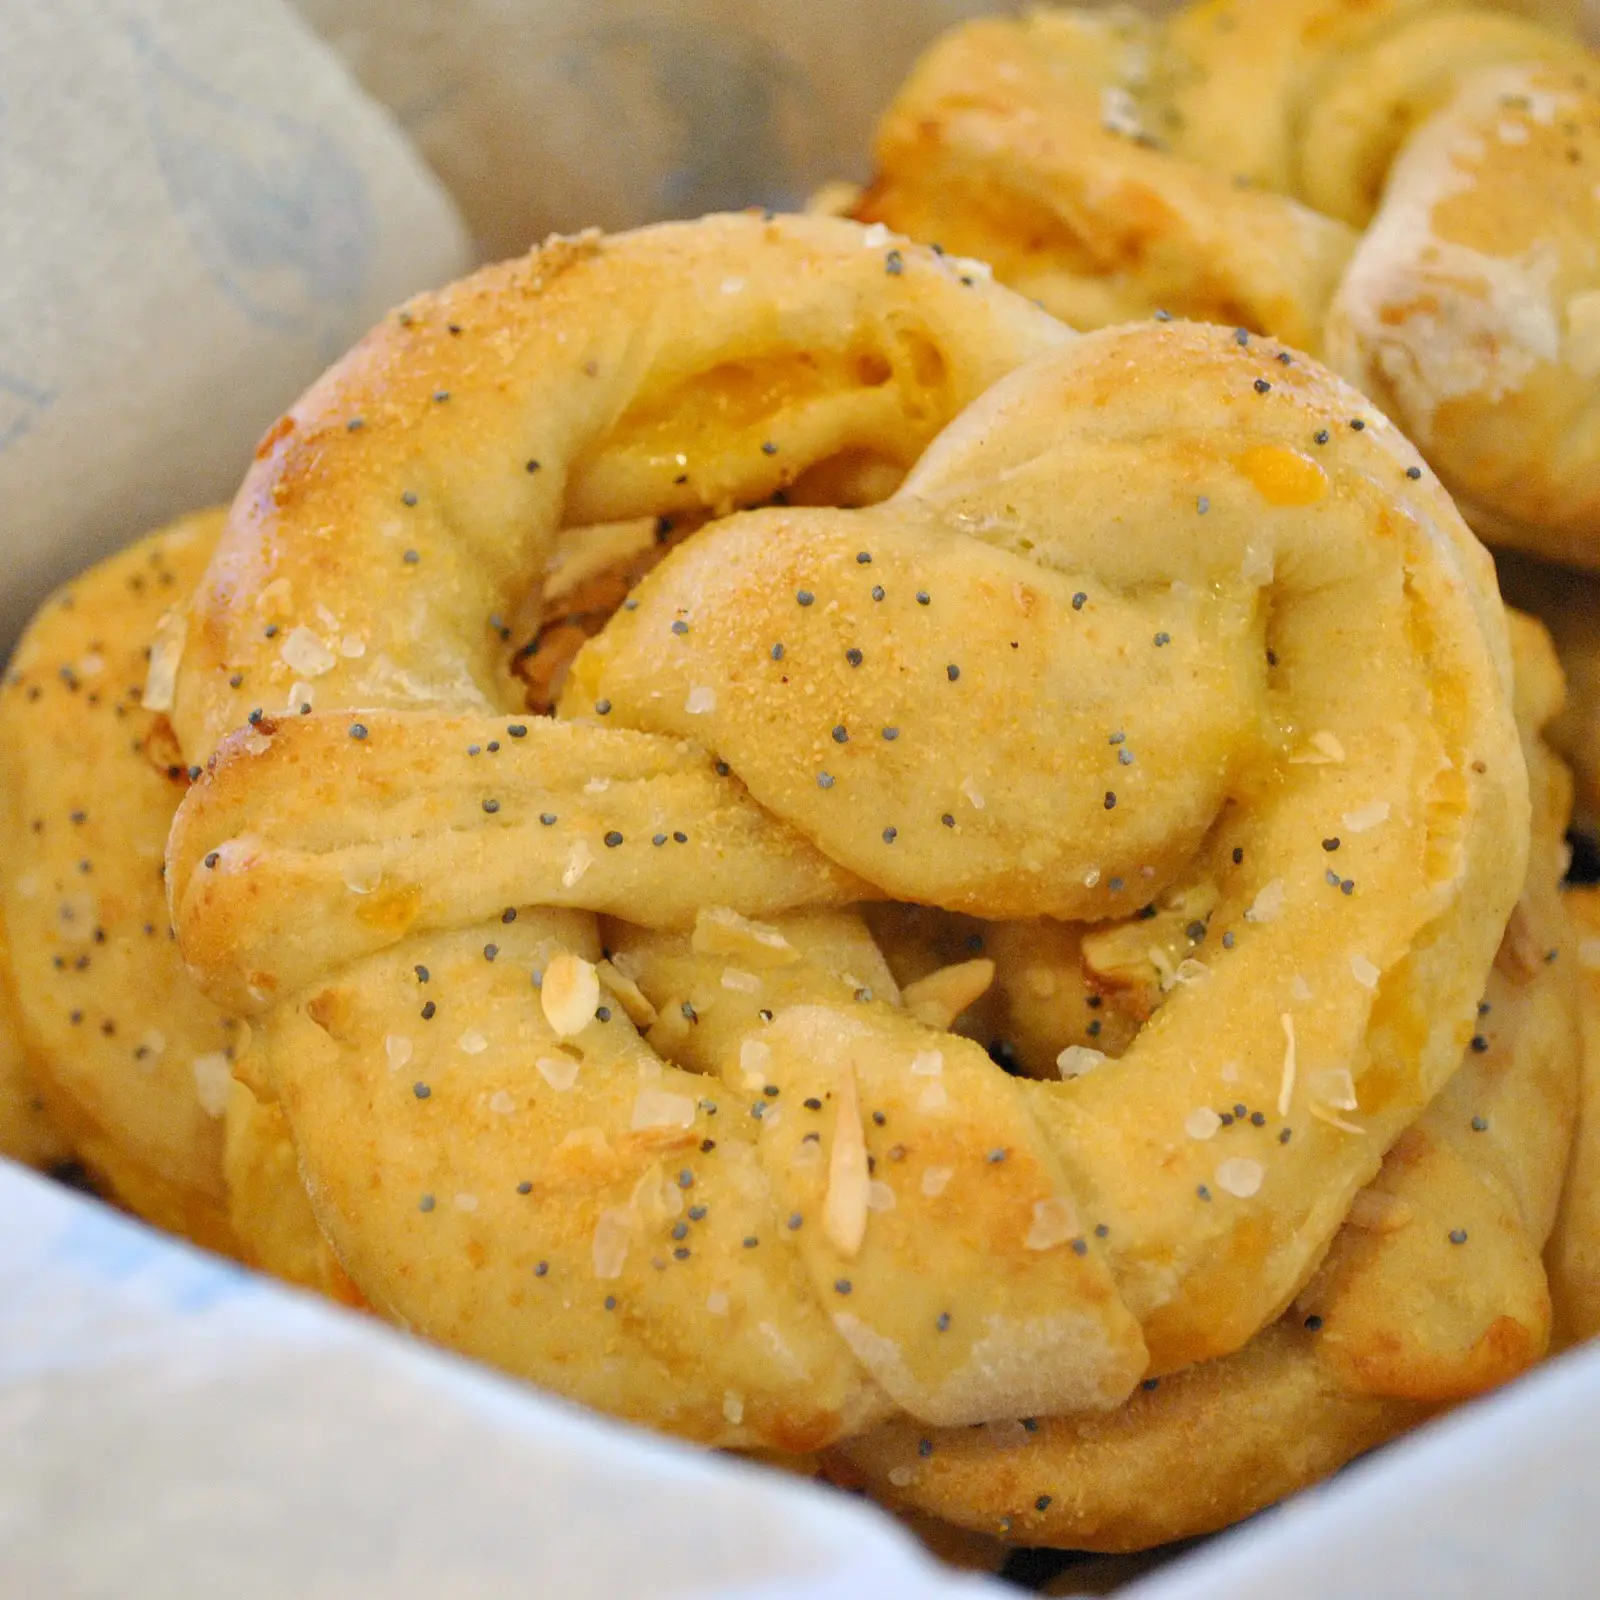 Homemade By Holman: Cheese Stuffed Everything Pretzels